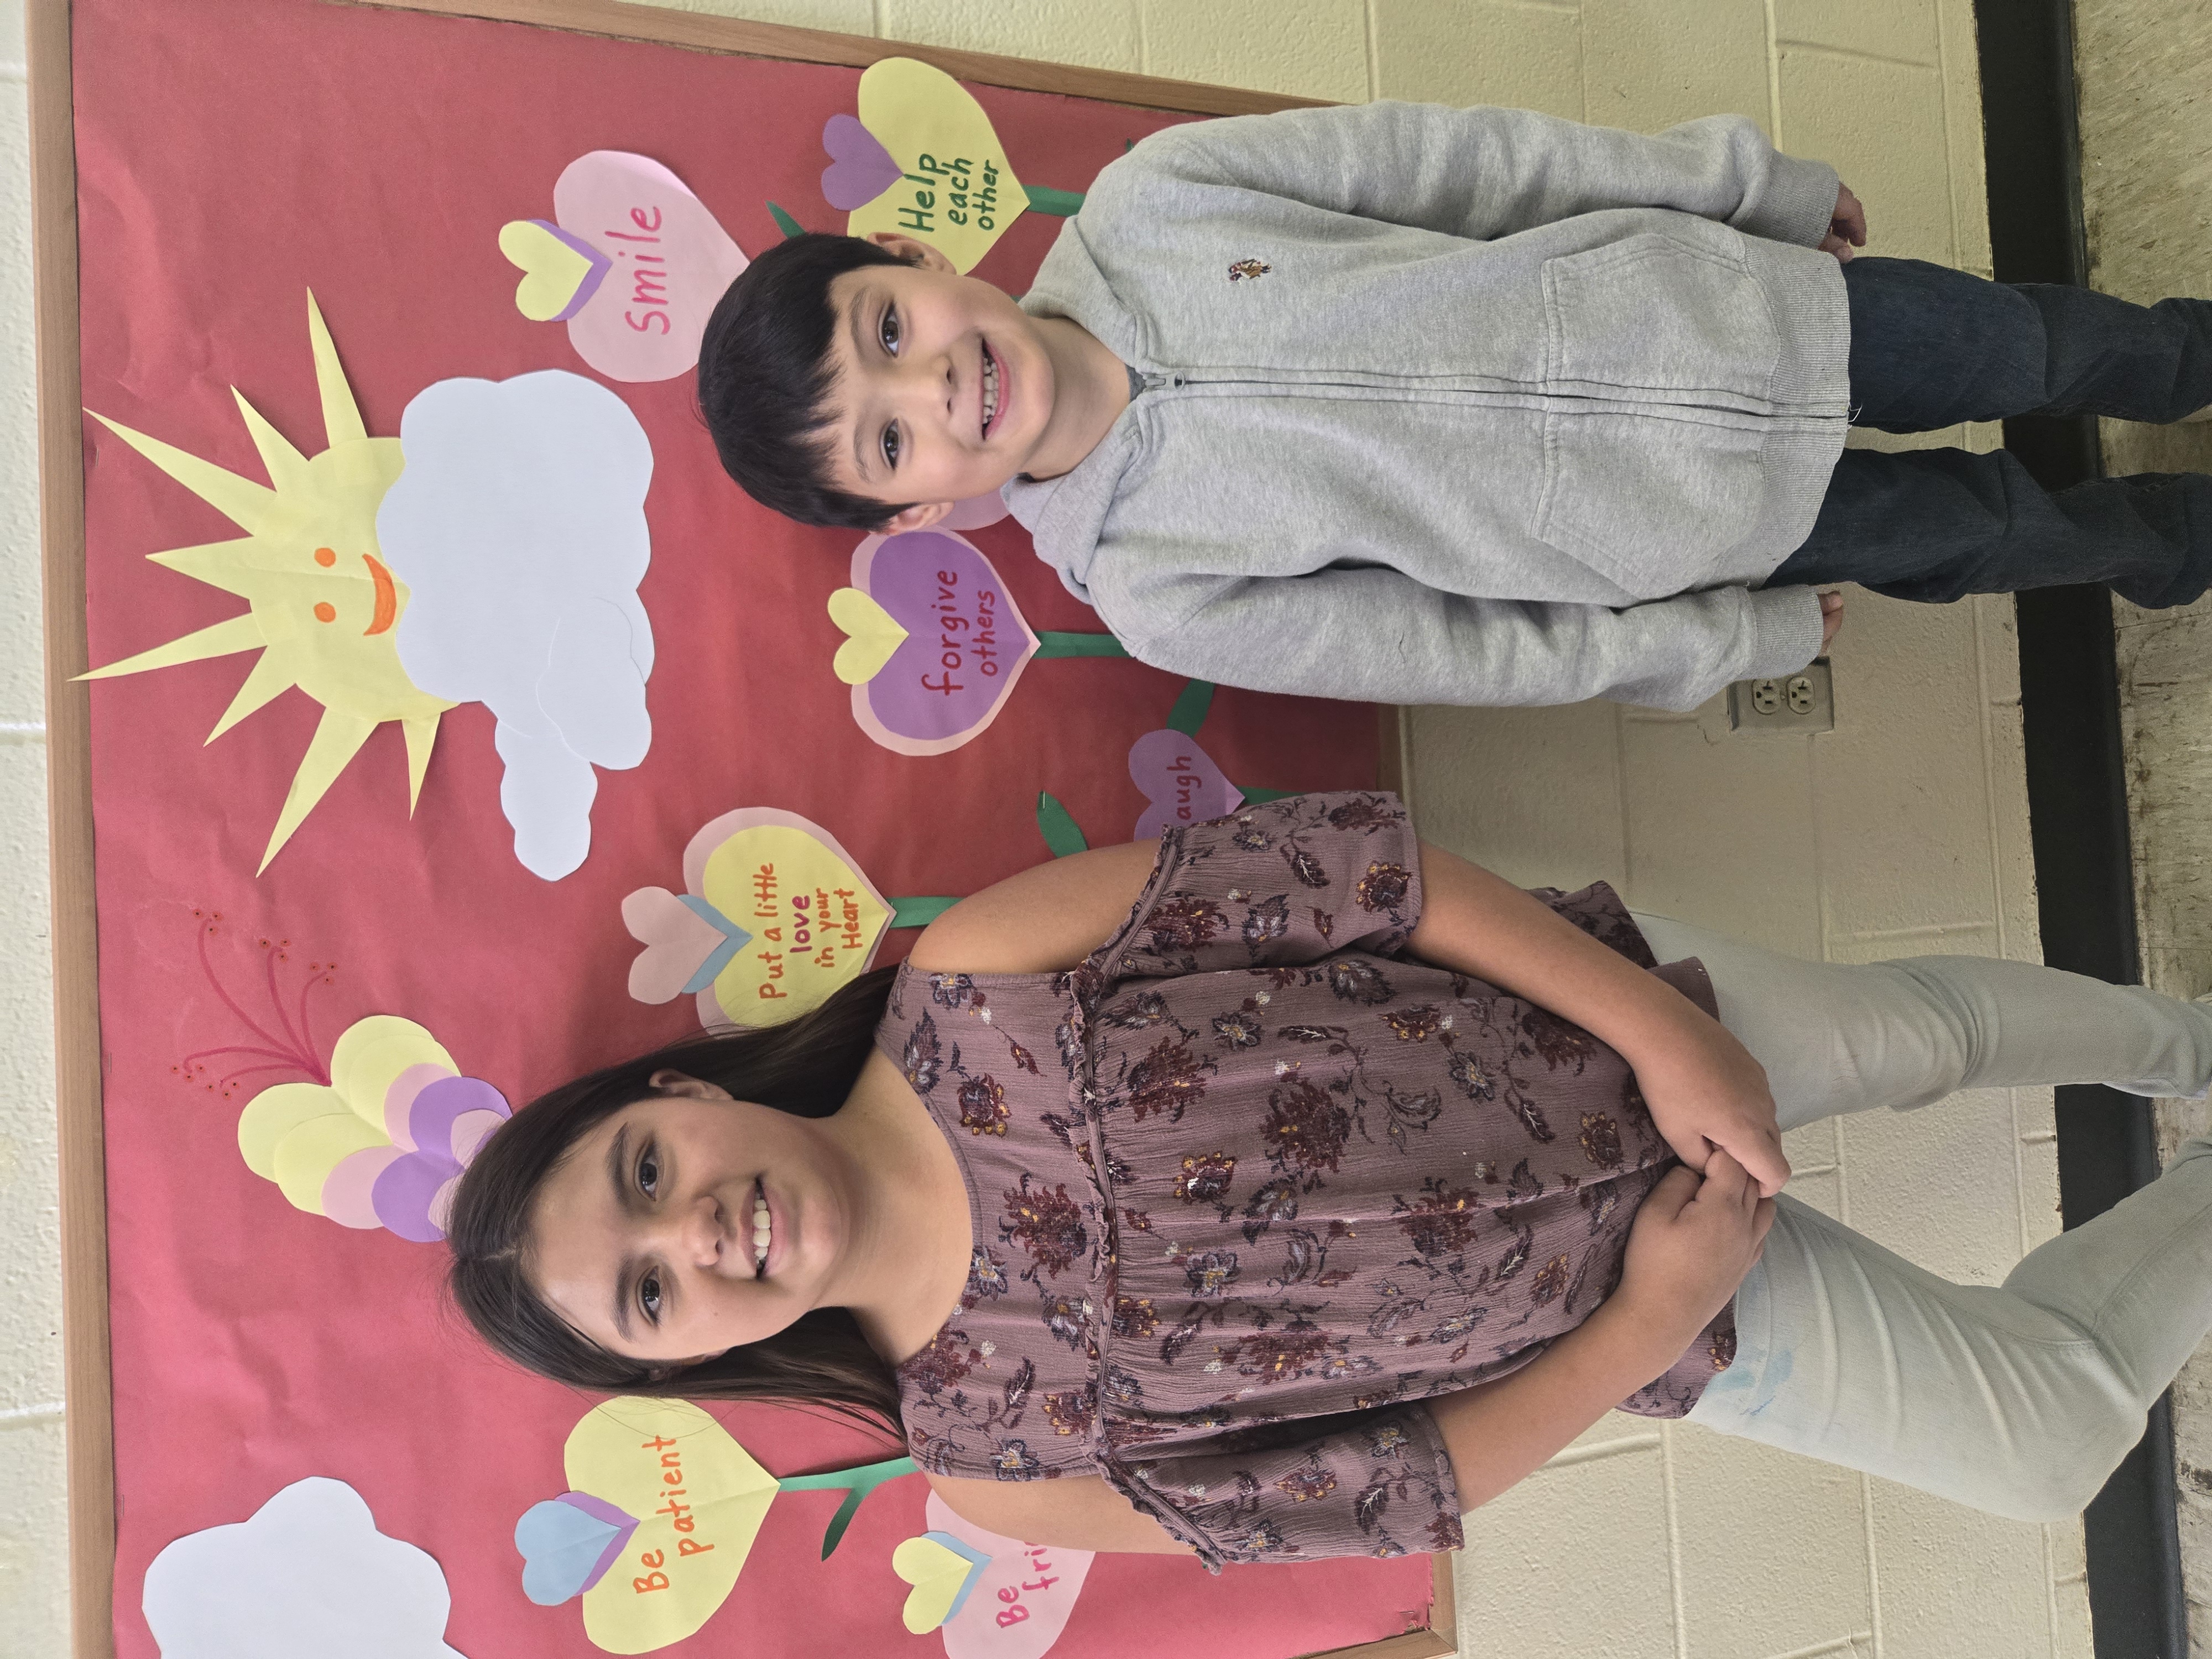 February Elementary Students of the Month